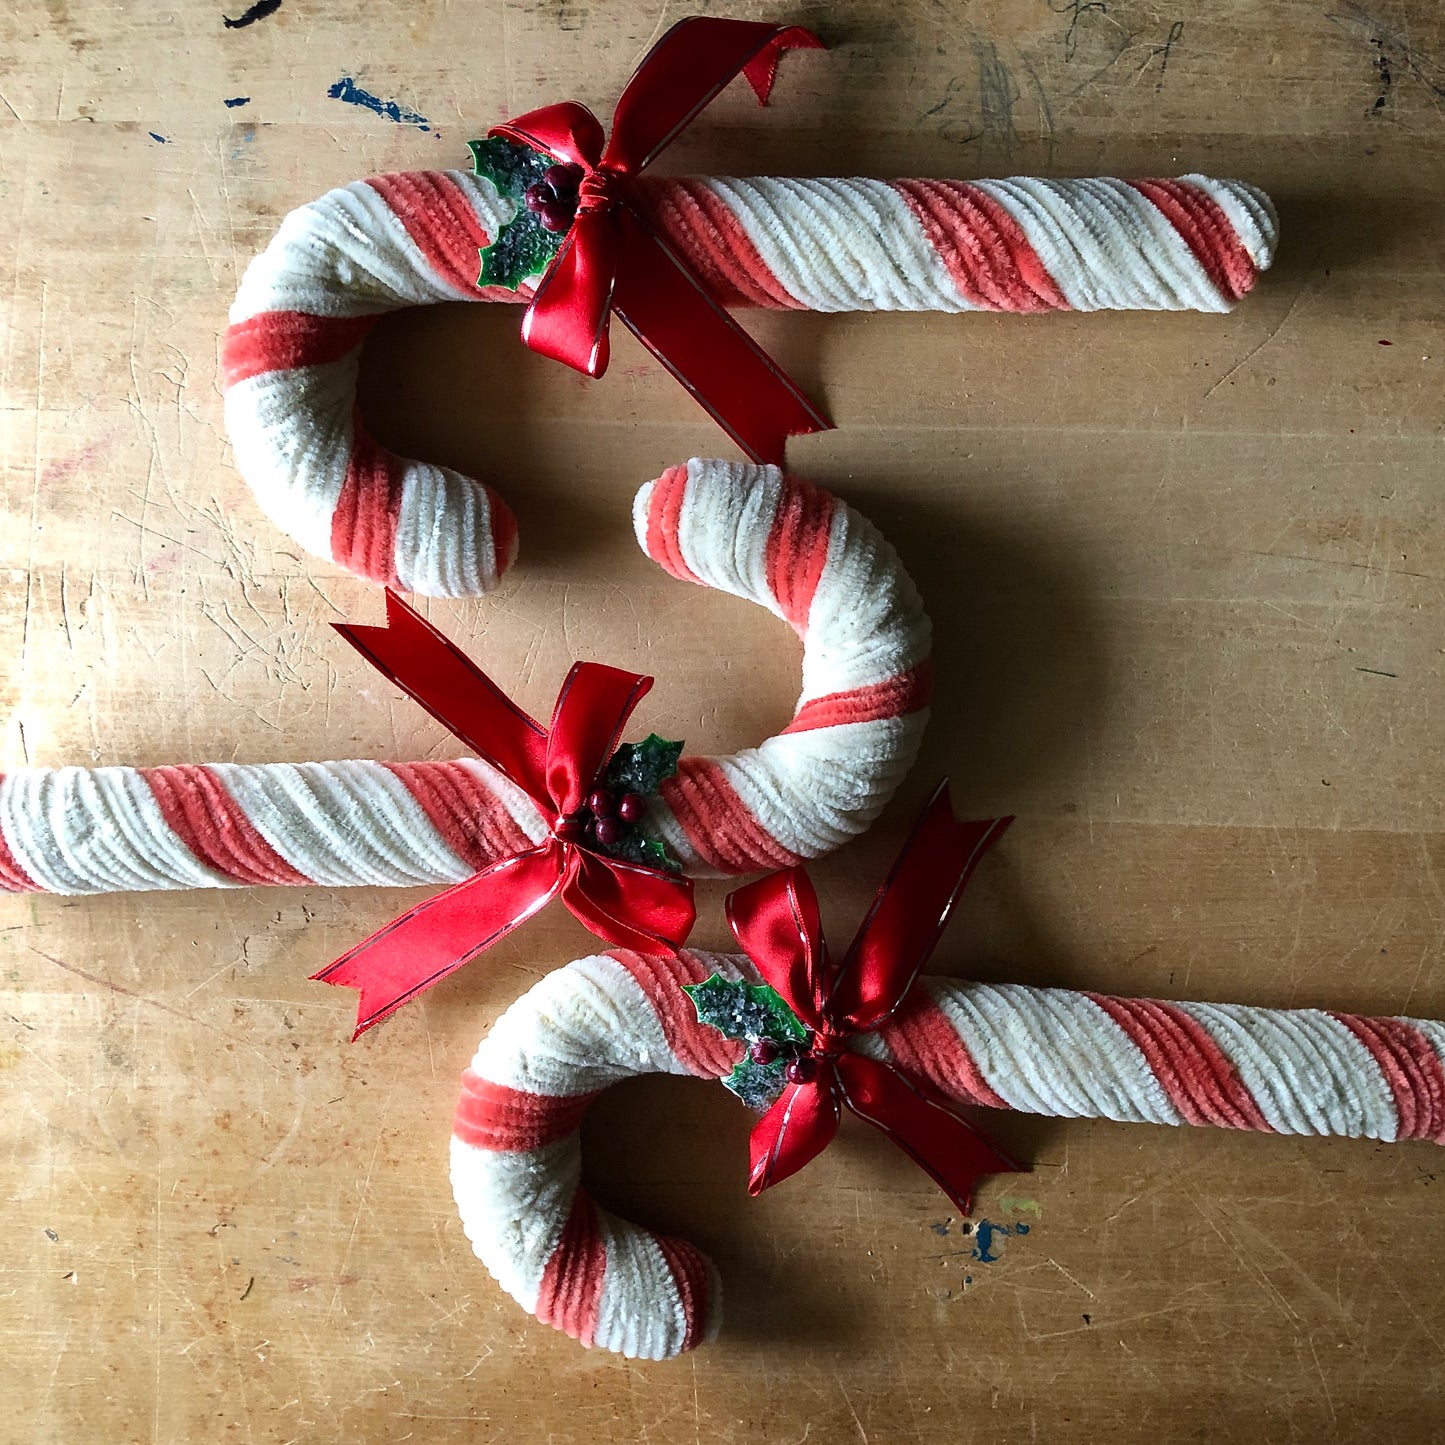 Vintage Pipe Cleaner Candy Canes (c.1960s)